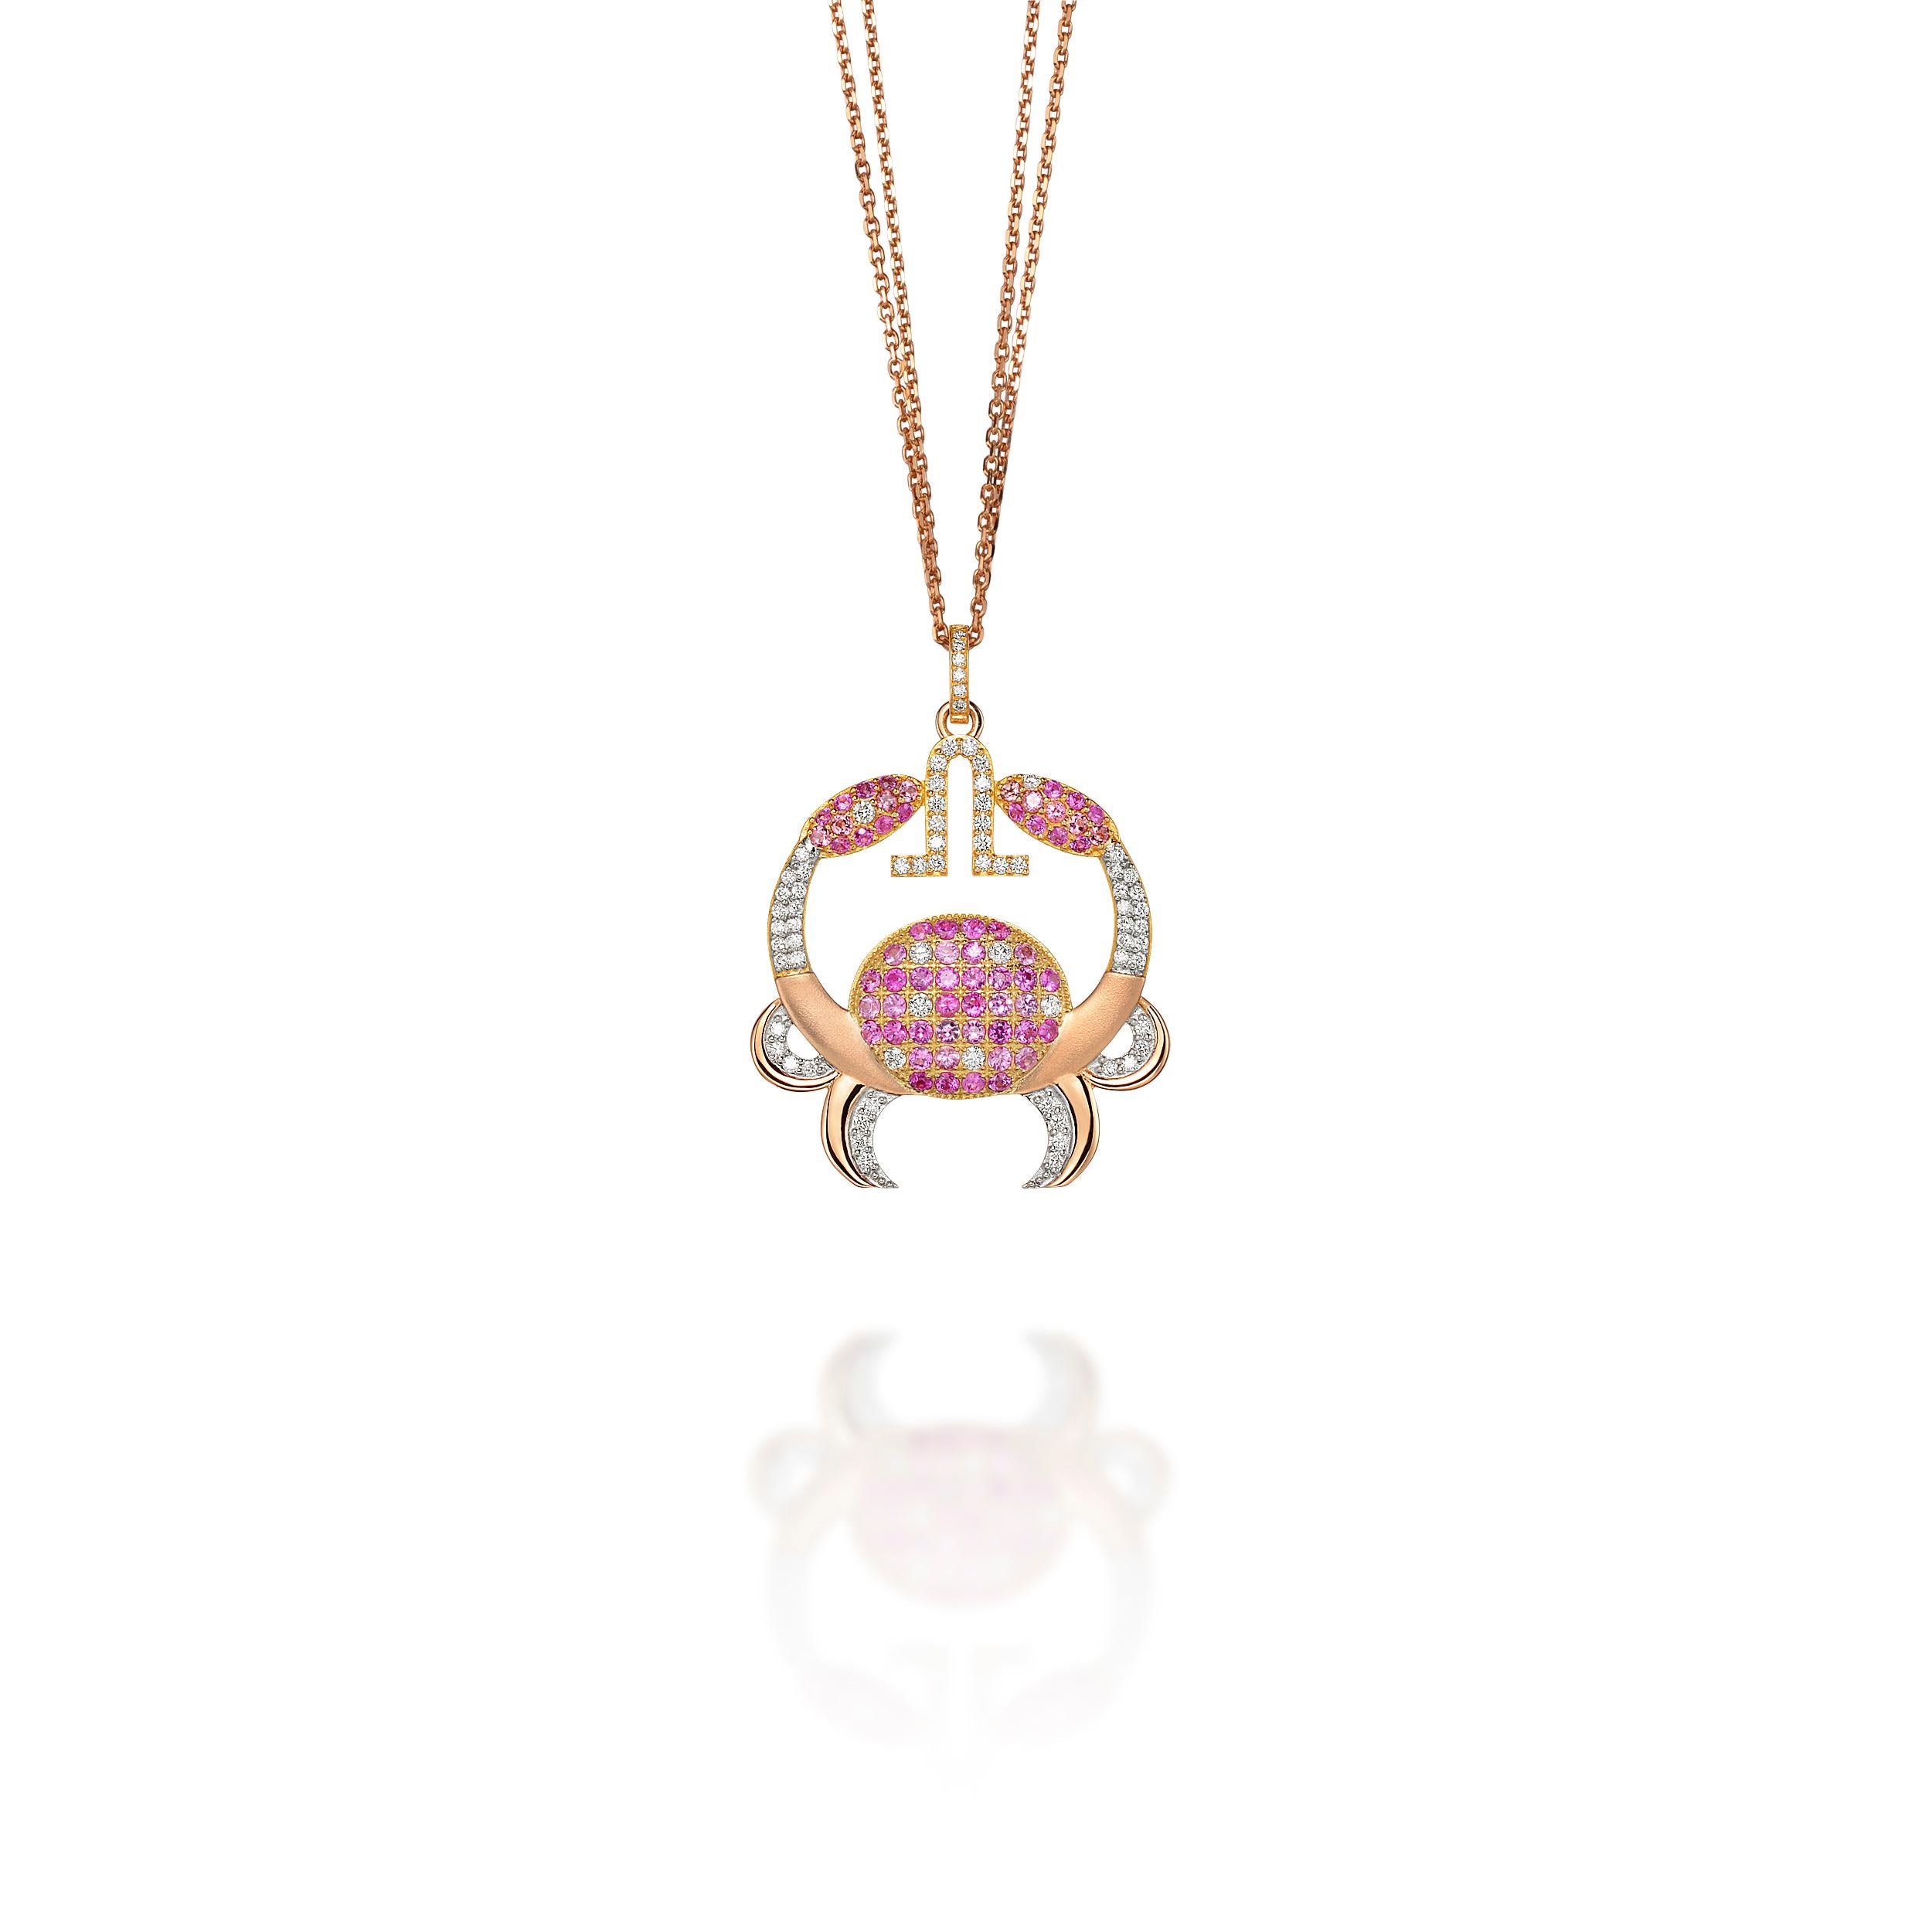 Cancer Pendant - radiantly feminine, gentle and supportive with an extraordinary intensity to protect the loved ones in complete devotion. Pink Tourmalines present you extra joy and well being.

Jazychic Zodiac Pendant 18k Gold with 0.69 ct Diamonds